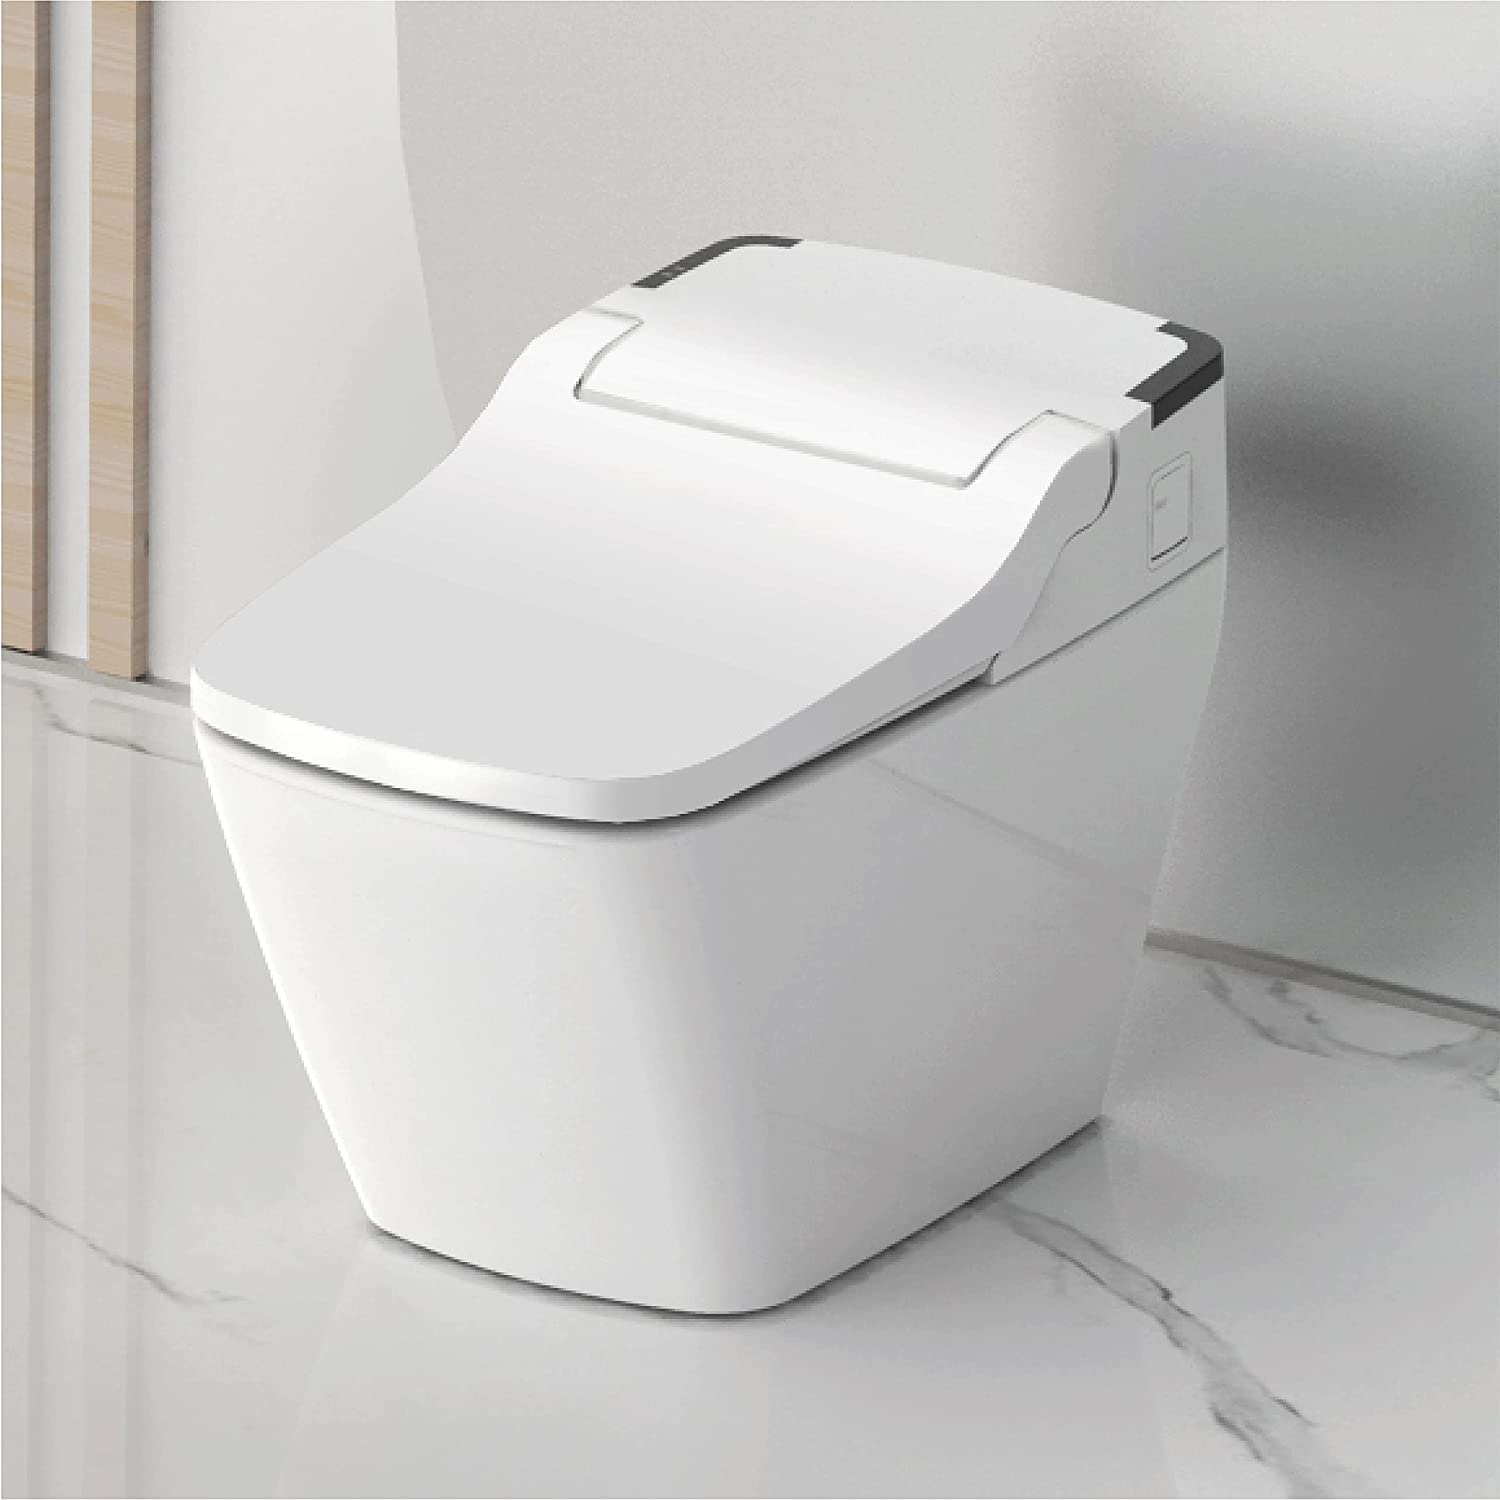 VOVO STYLEMENT TCB-090S Integrated Smart Toilet